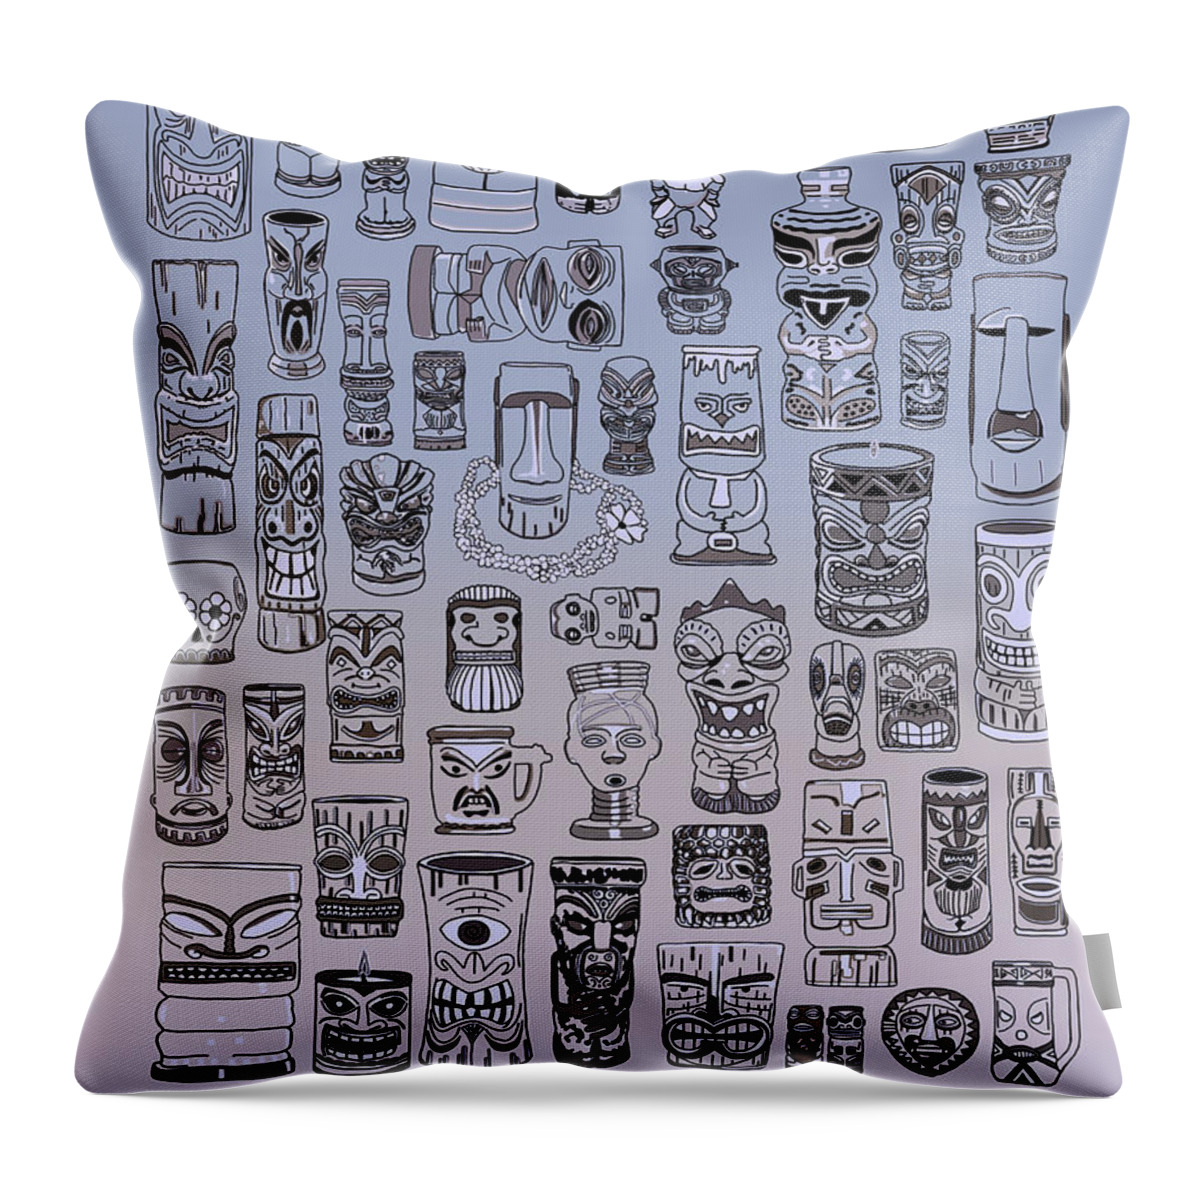 Ancient Relic Throw Pillow featuring the digital art Tiki Cool Zone by Megan Dirsa-DuBois